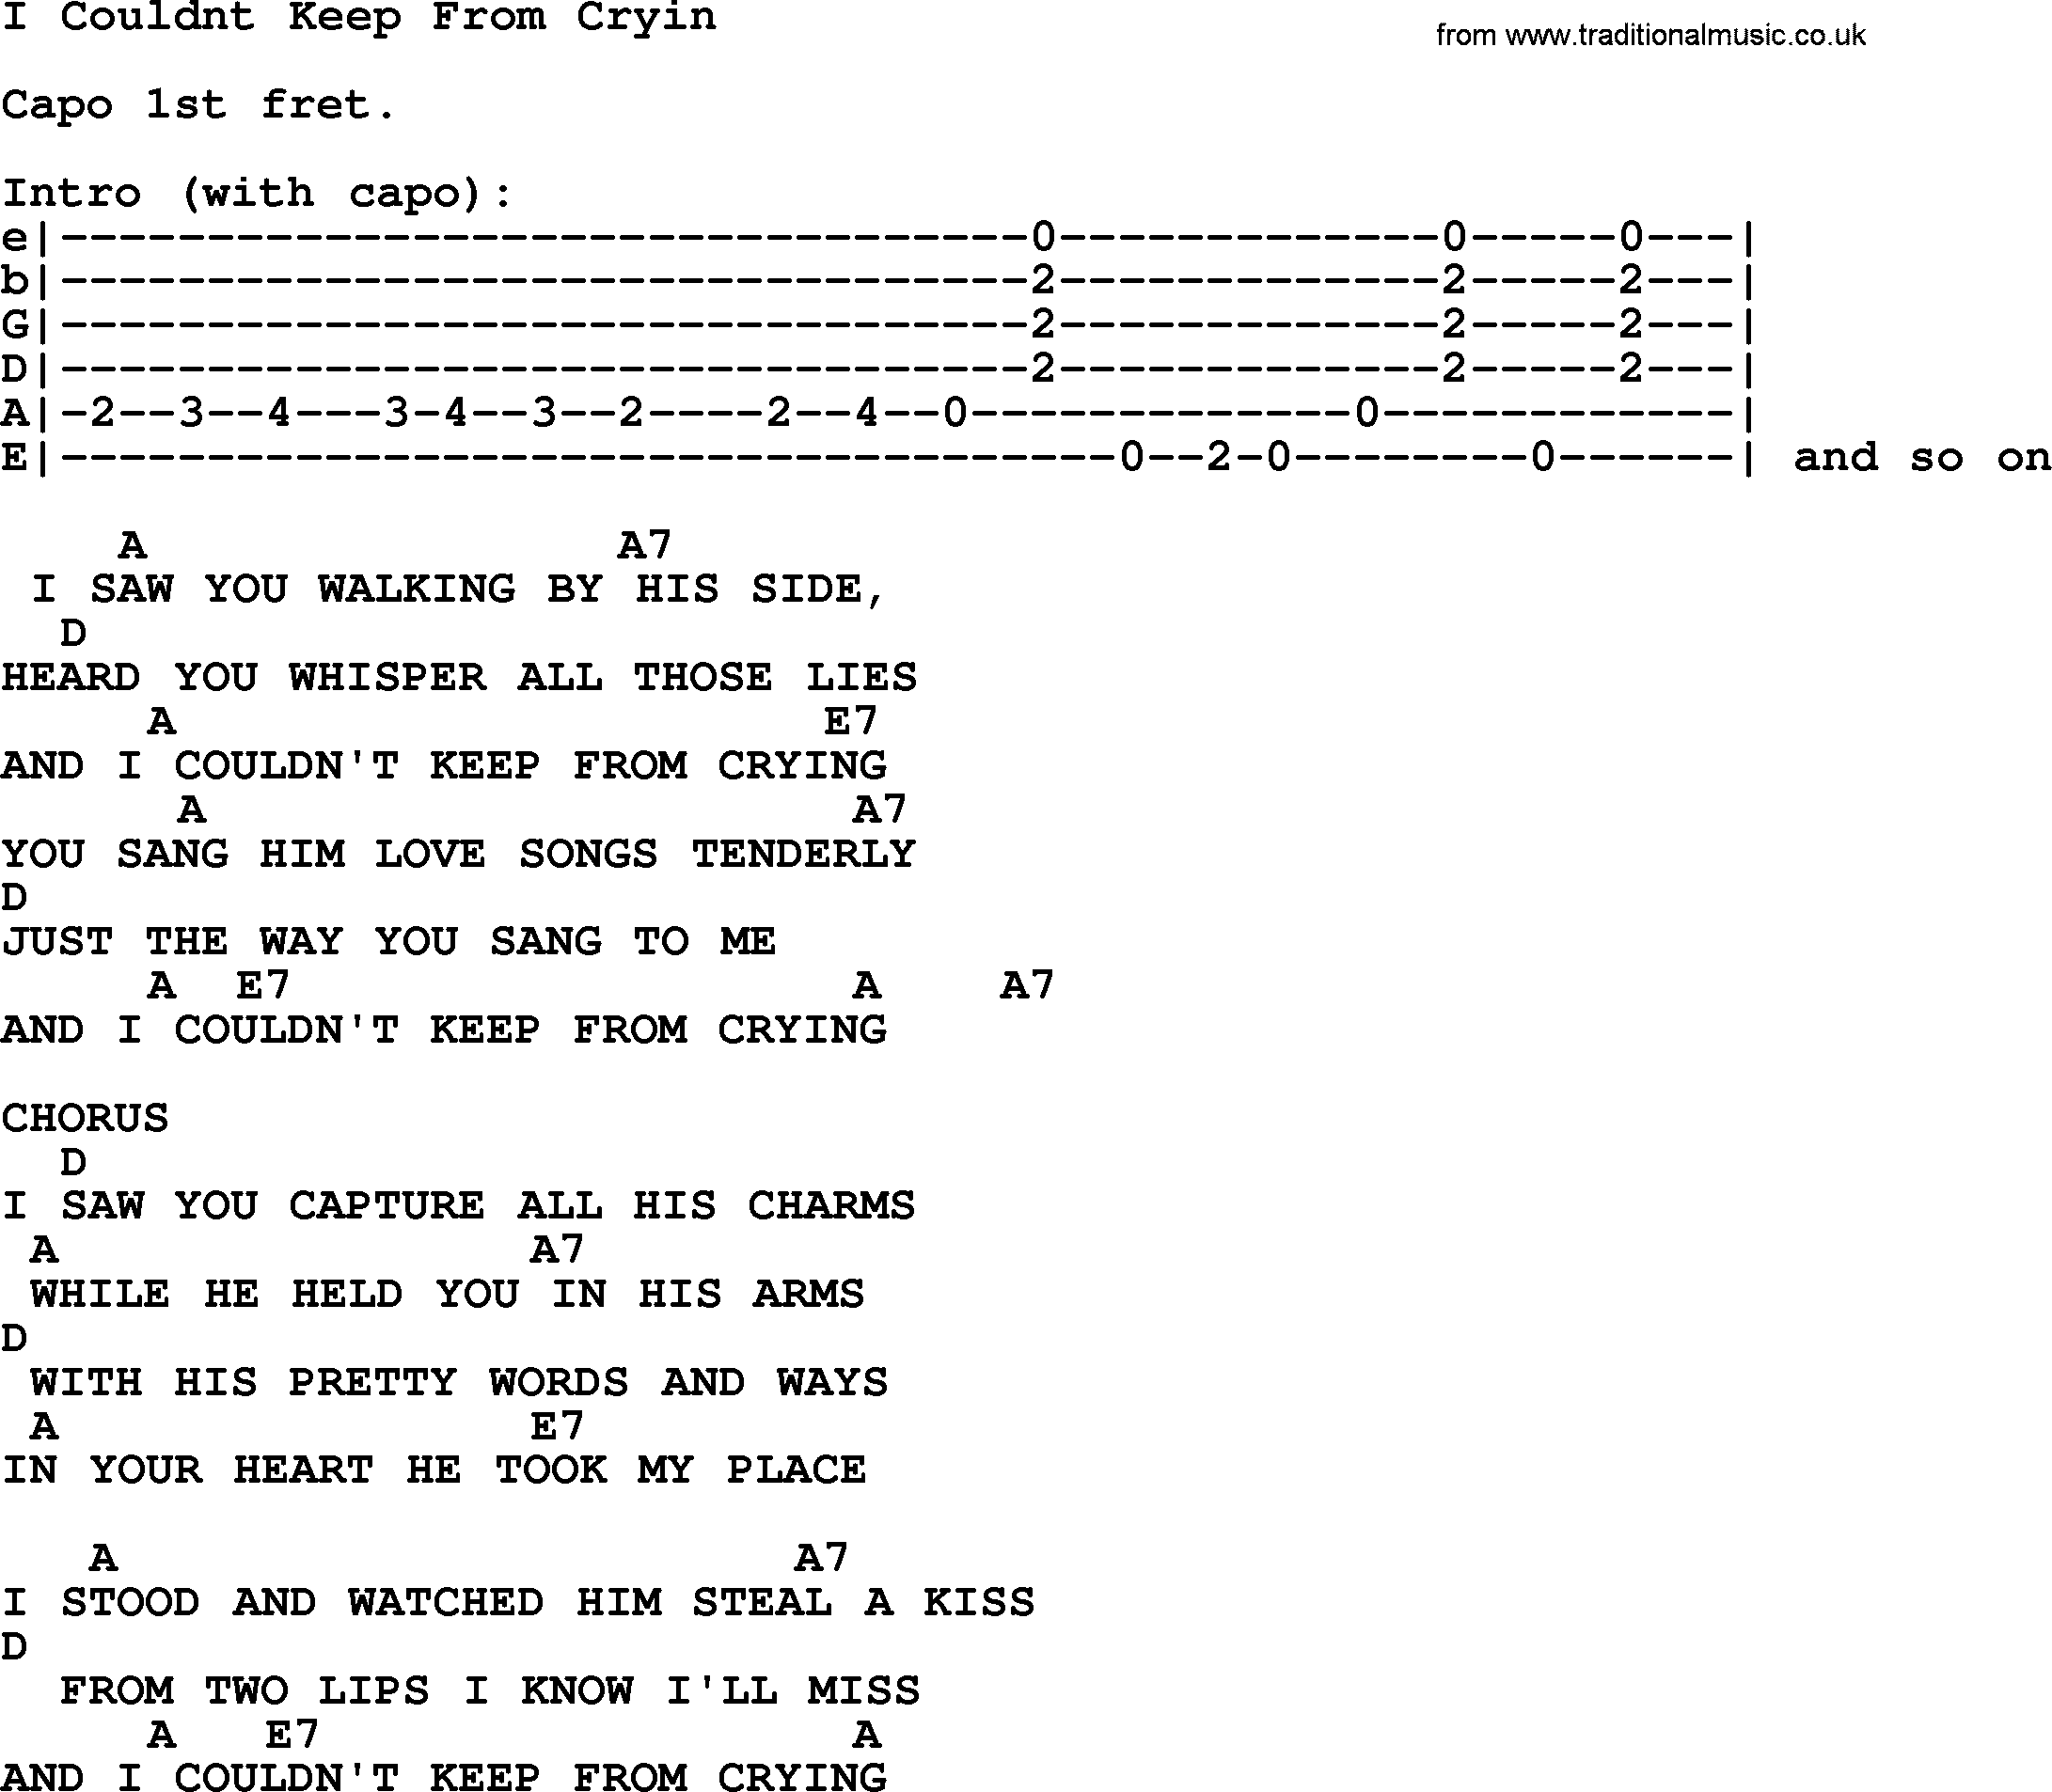 Johnny Cash song I Couldnt Keep From Cryin, lyrics and chords